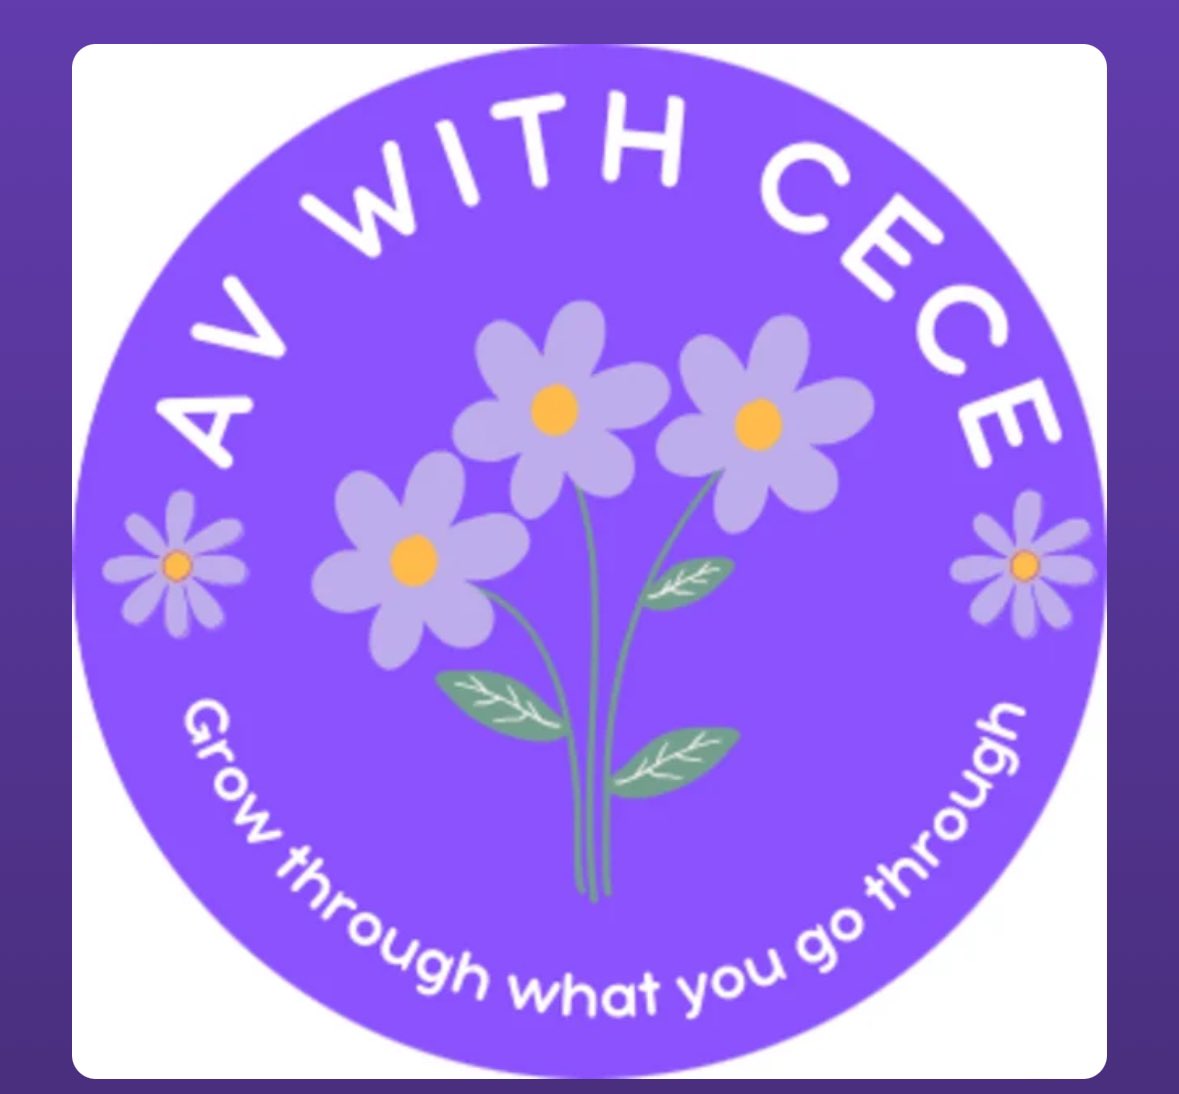 Episode 1 is live! Have a listen on your favorite podcast platform and subscribe 🎧 Way to go Cece!!  #avtweeps #baldavguys #takecare #AVinEDU #BAVGadventures #avwithcece #growthroughwhatyougothrough #cecelia #mspresident @Smearin_Off_Ice @AVBrandy #InternationalWomensDay